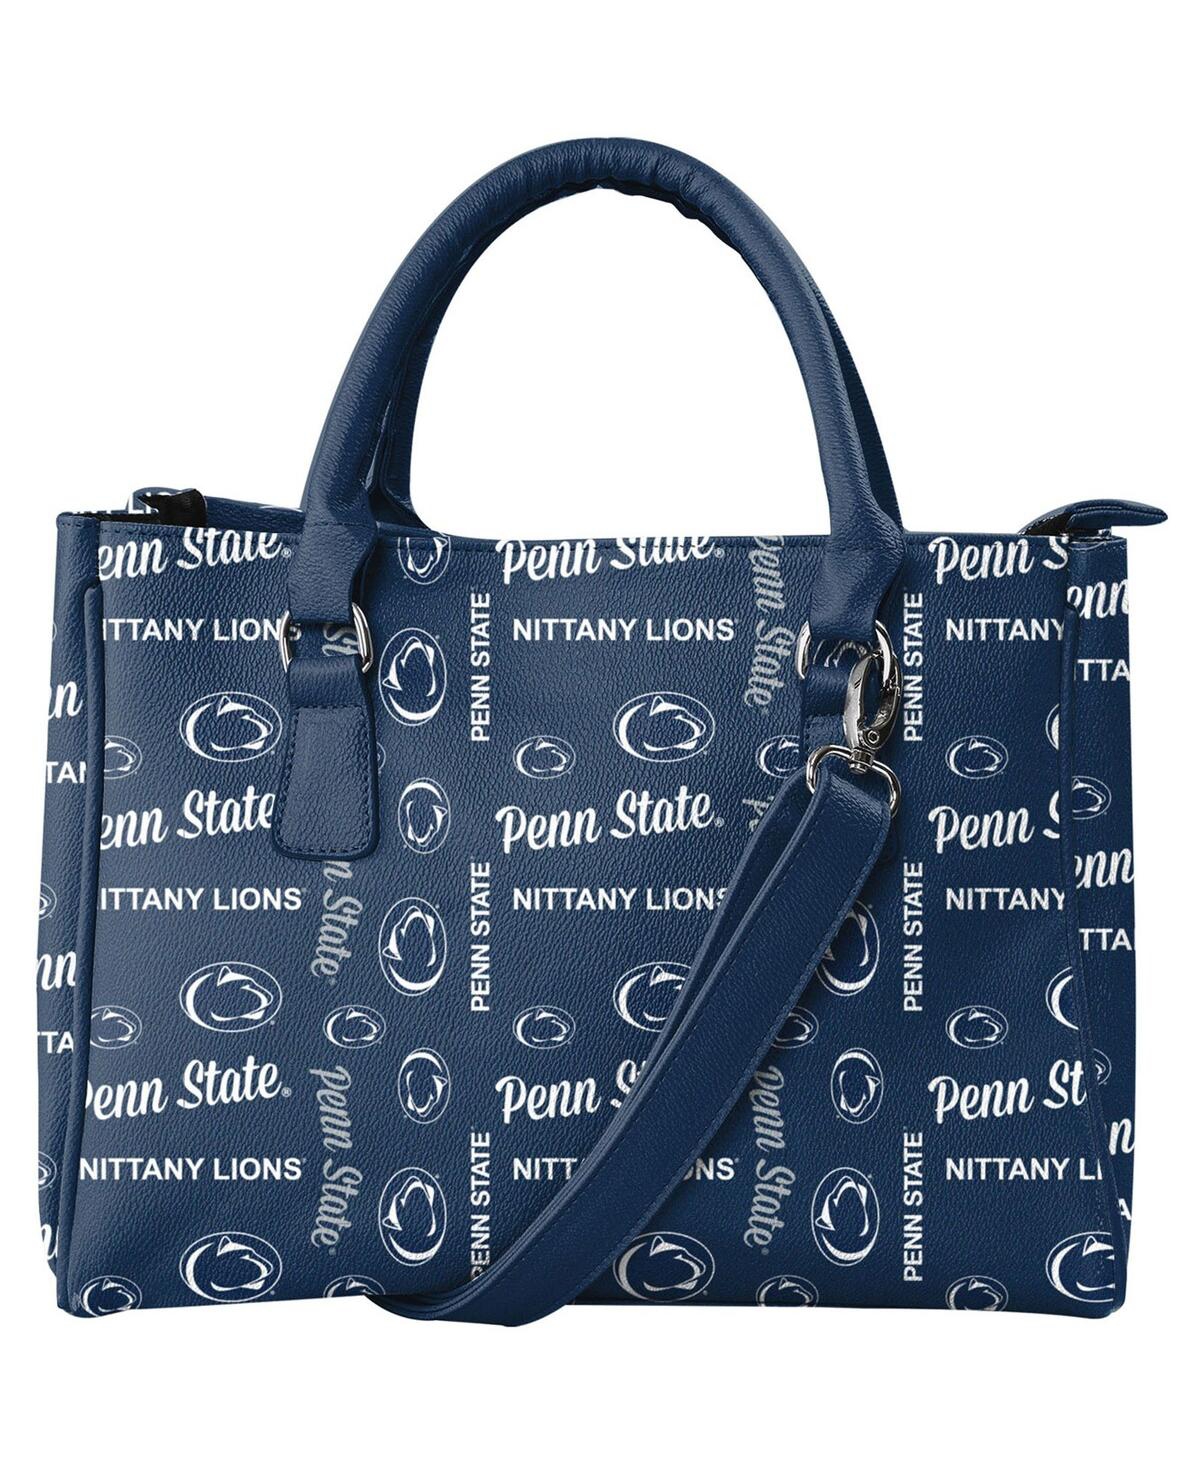 Women's Foco Penn State Nittany Lions Repeat Brooklyn Tote - Navy